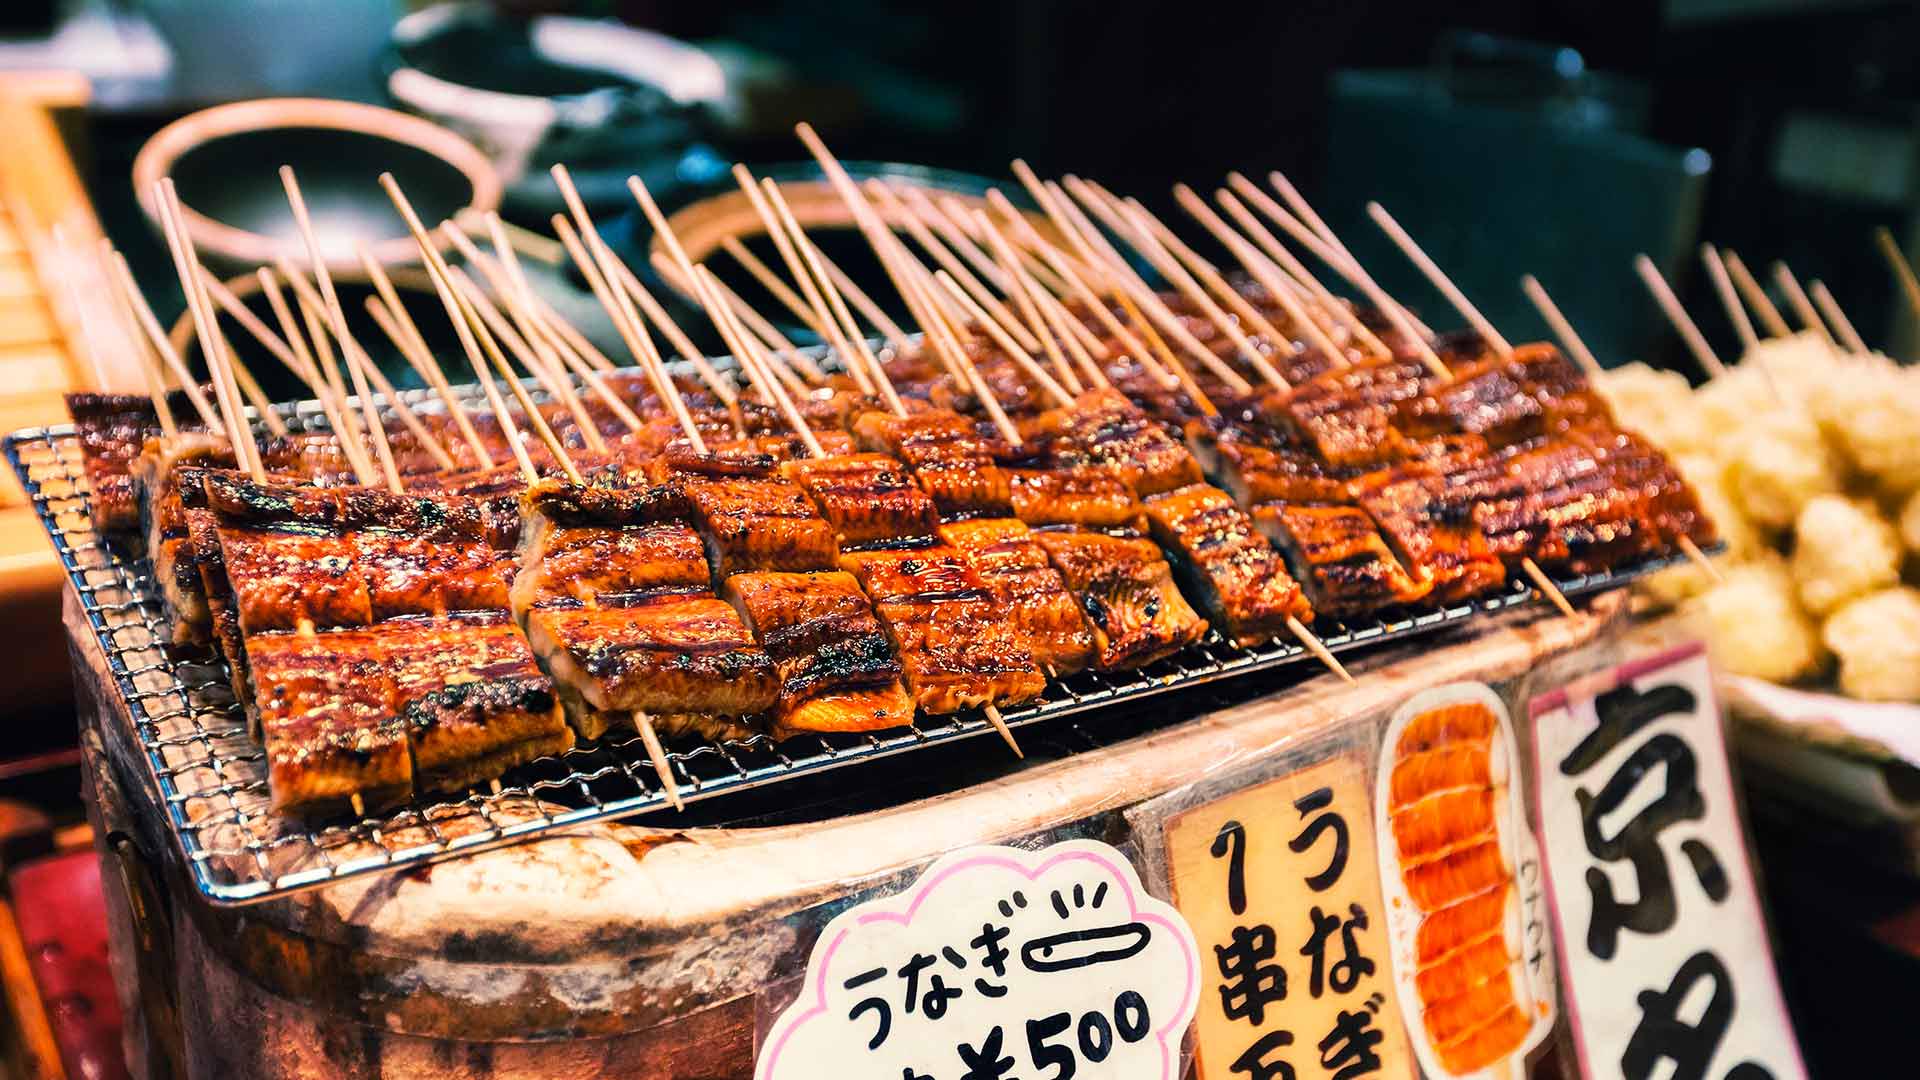 10 Japanese Food Blogs to Make Your Mouth Water byFood.